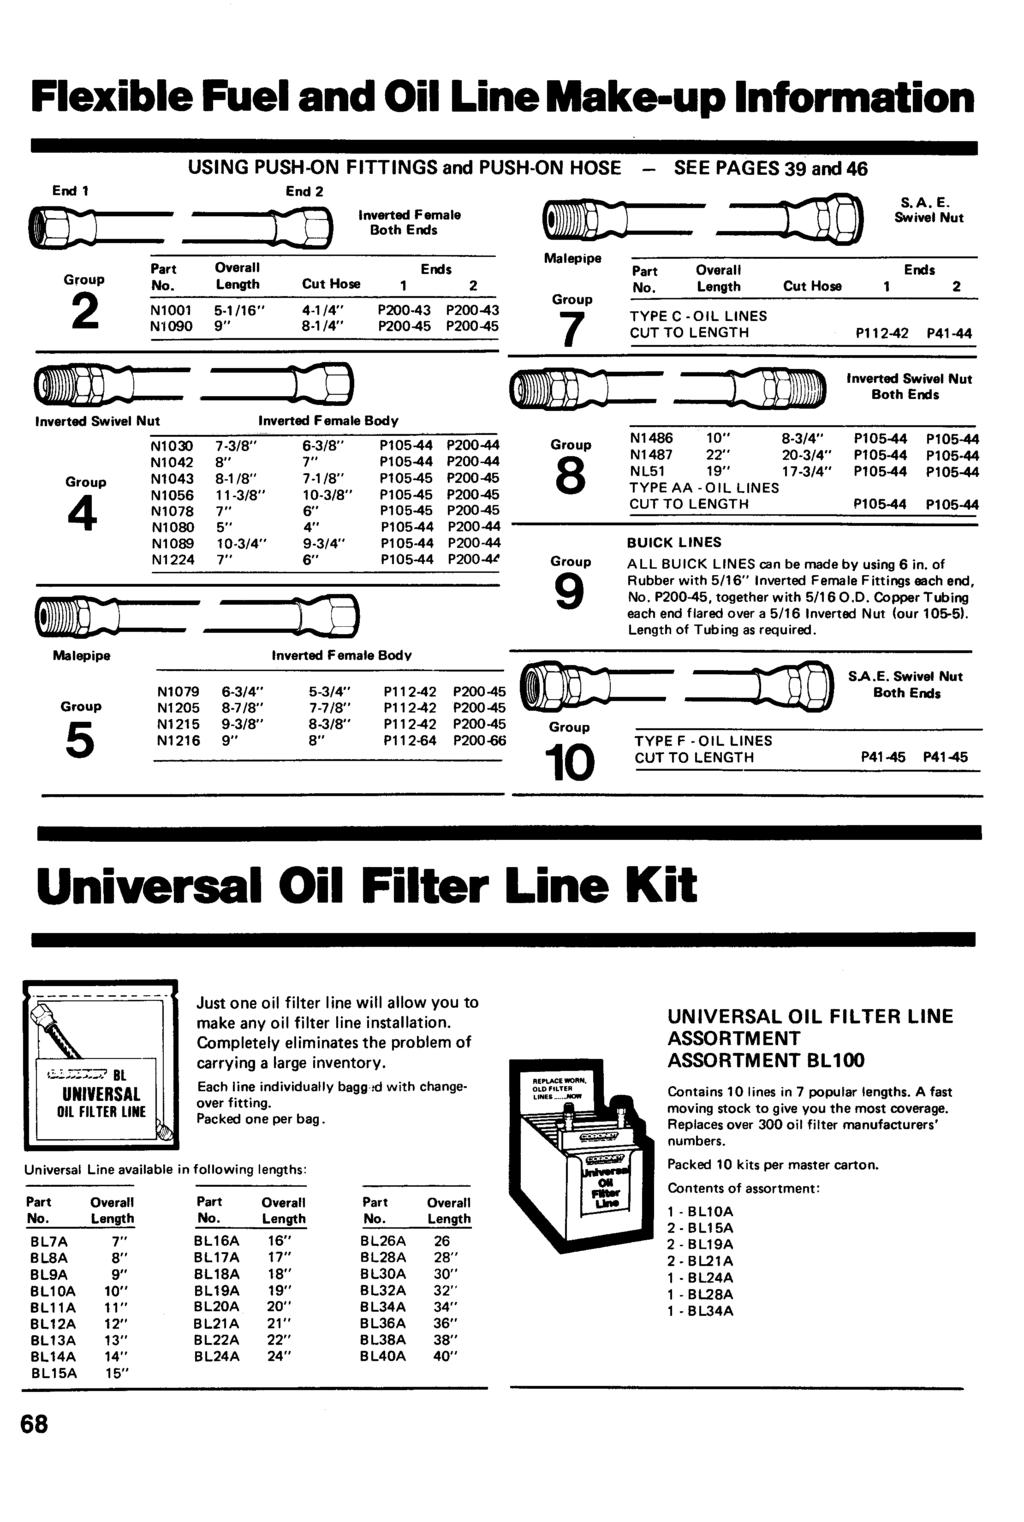 Flexible Fuel and Oil Line Make-up Information End 1 Group USING PUSH-ON FITTINGS and PUSH-ON HOSE - SEE PAGES 39 and 46 End 2 S. A. E. Inverted Female 1 f Swivel Nut Both Ends Malepipe Part Overall Ends Part Overall Ends No.